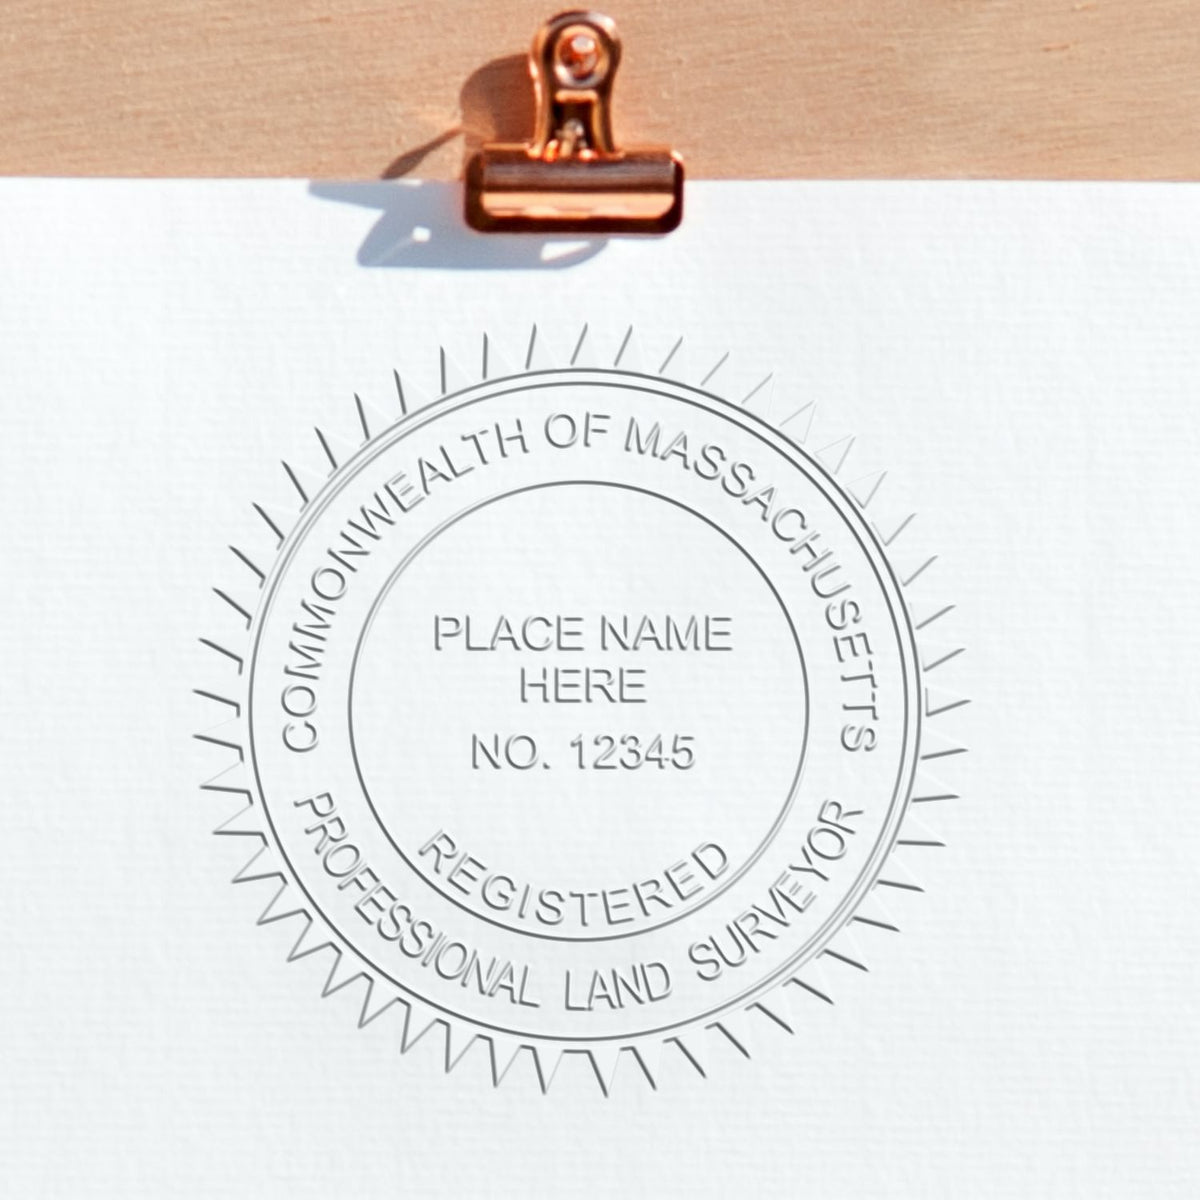 An in use photo of the Hybrid Massachusetts Land Surveyor Seal showing a sample imprint on a cardstock